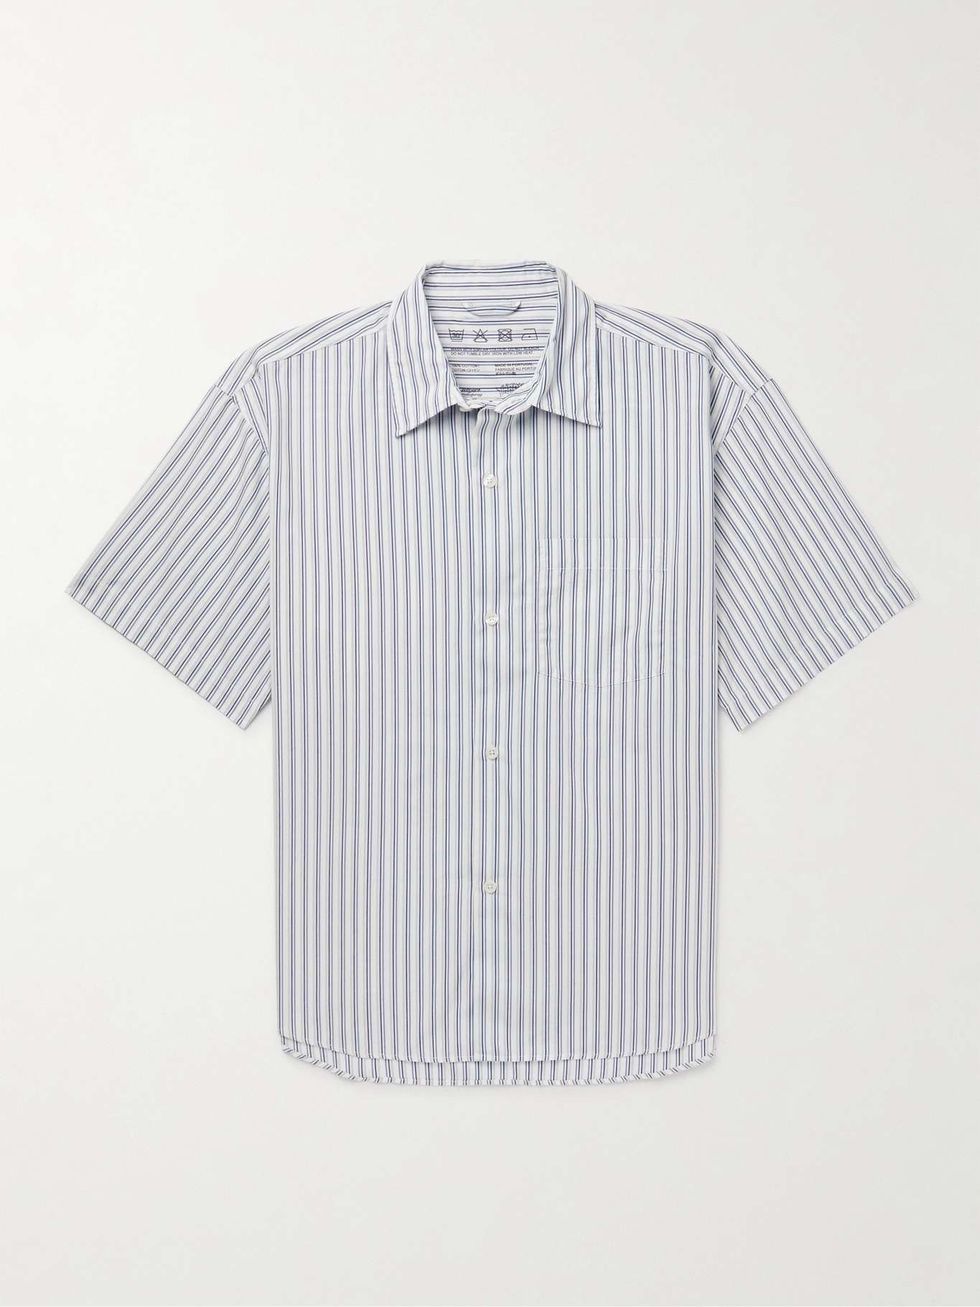 Throwing Fits x Mr Porter Capsule Collection Release, Prices, and Where ...